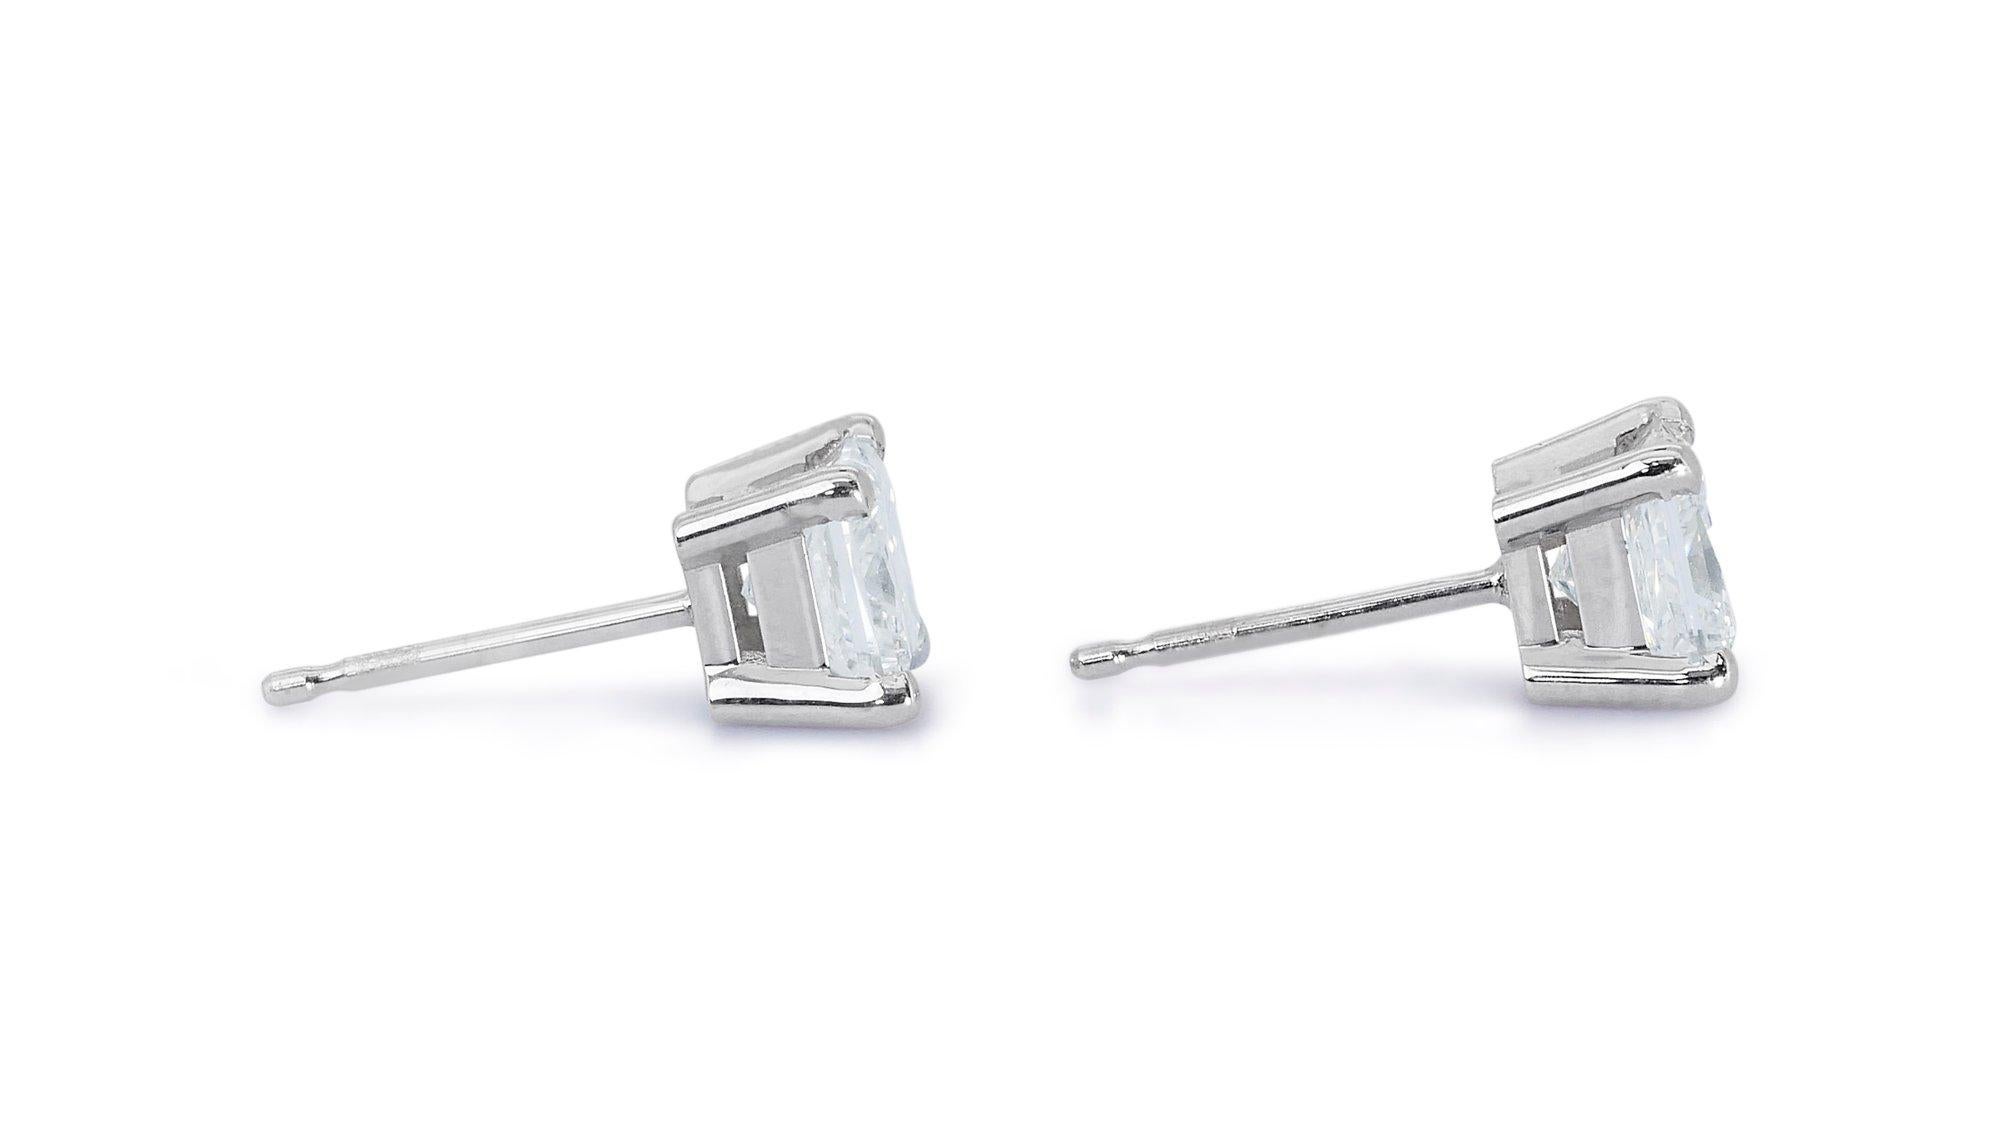 Classic 2.00ct Diamond Stud Earrings in 18k White Gold - GIA Certified For Sale 1